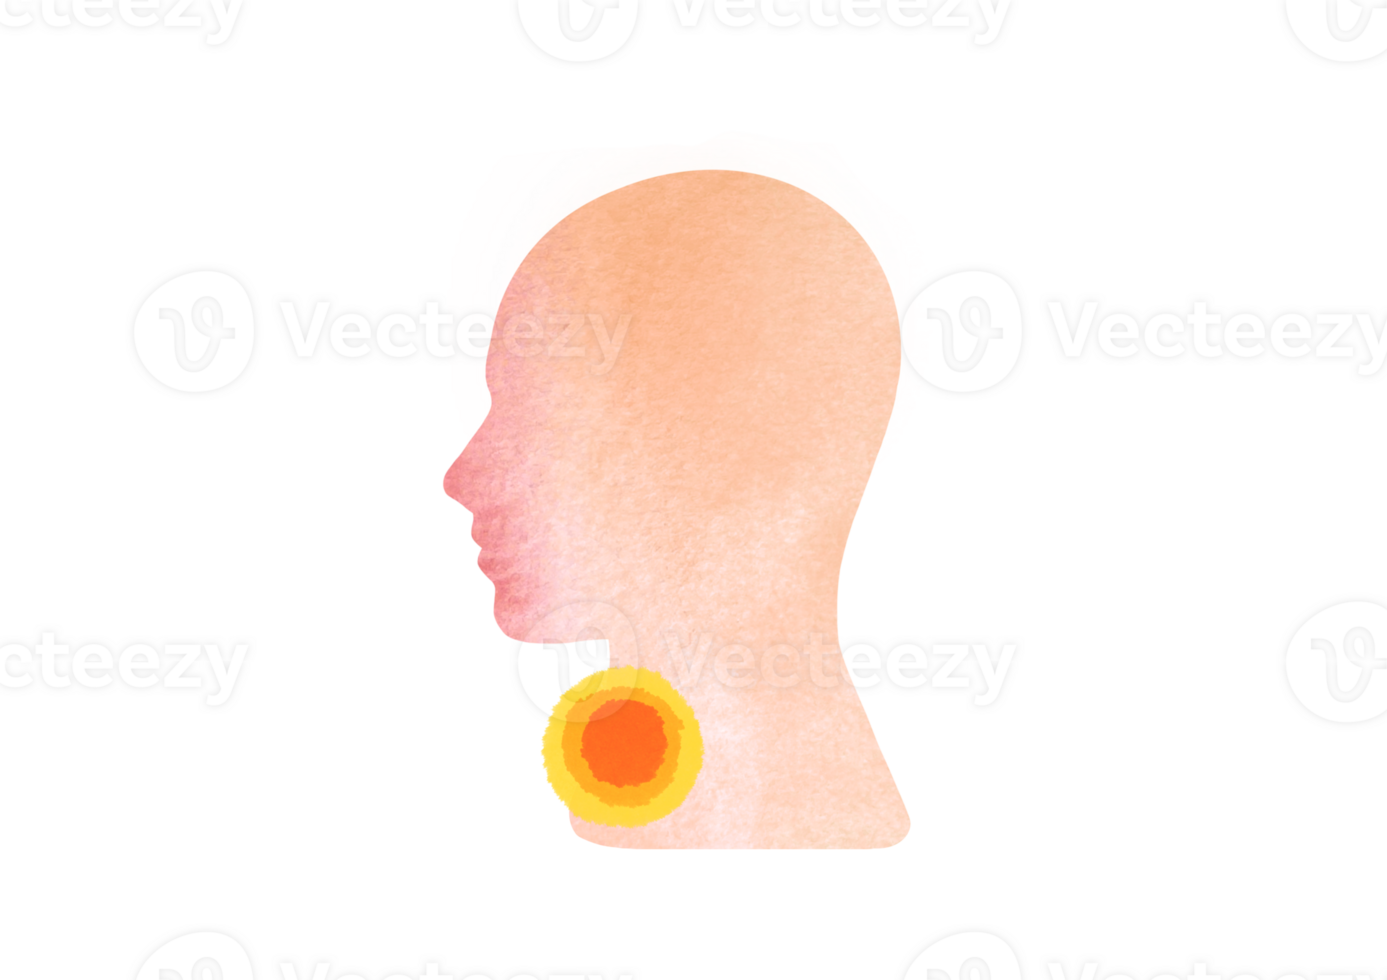 person suffers from Sore throat, runny nose. watercolor silhouette of head in profile with red nose isolated on transparent background. clipart and cut out element png